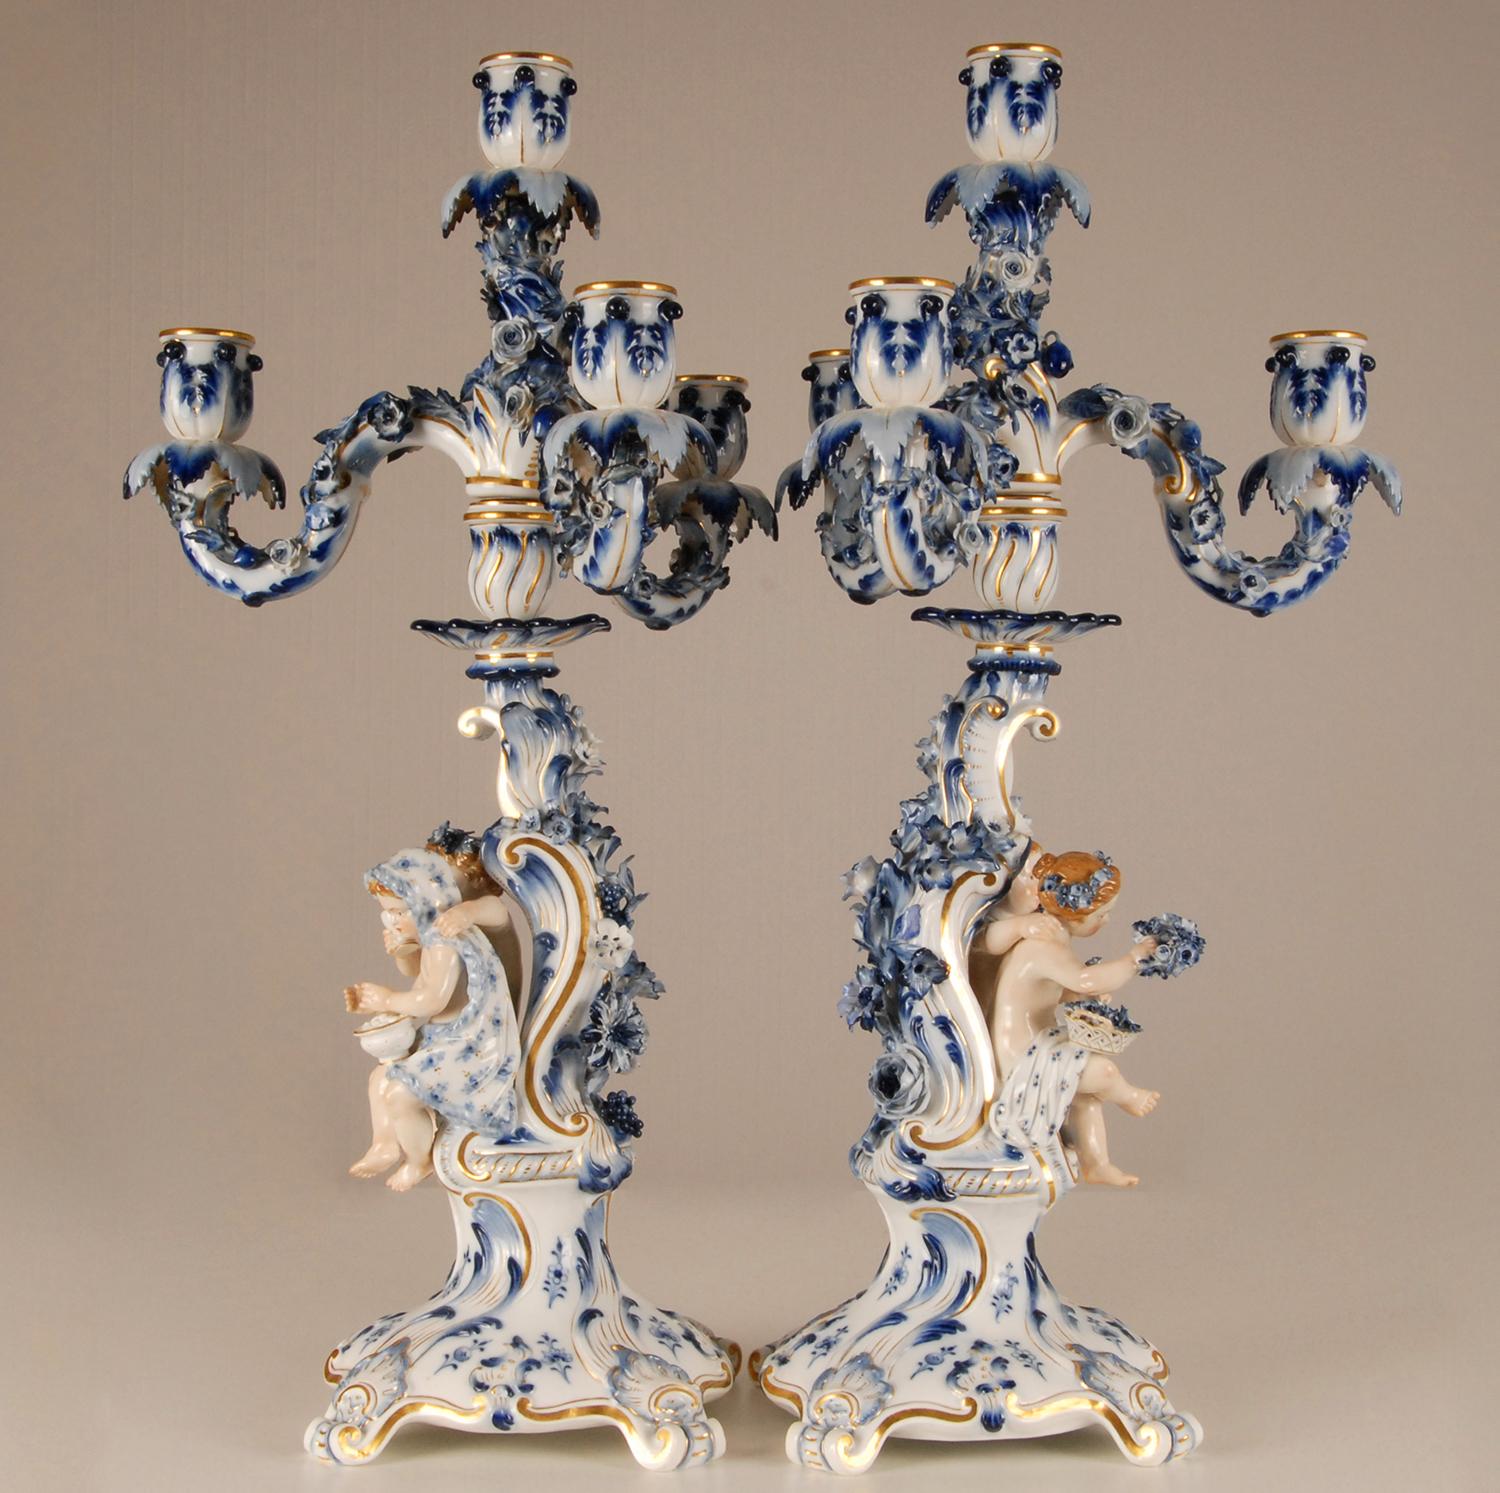 19th century Meissen Porcelain Candelabras figurine white and Blue Union, a Pair For Sale 4